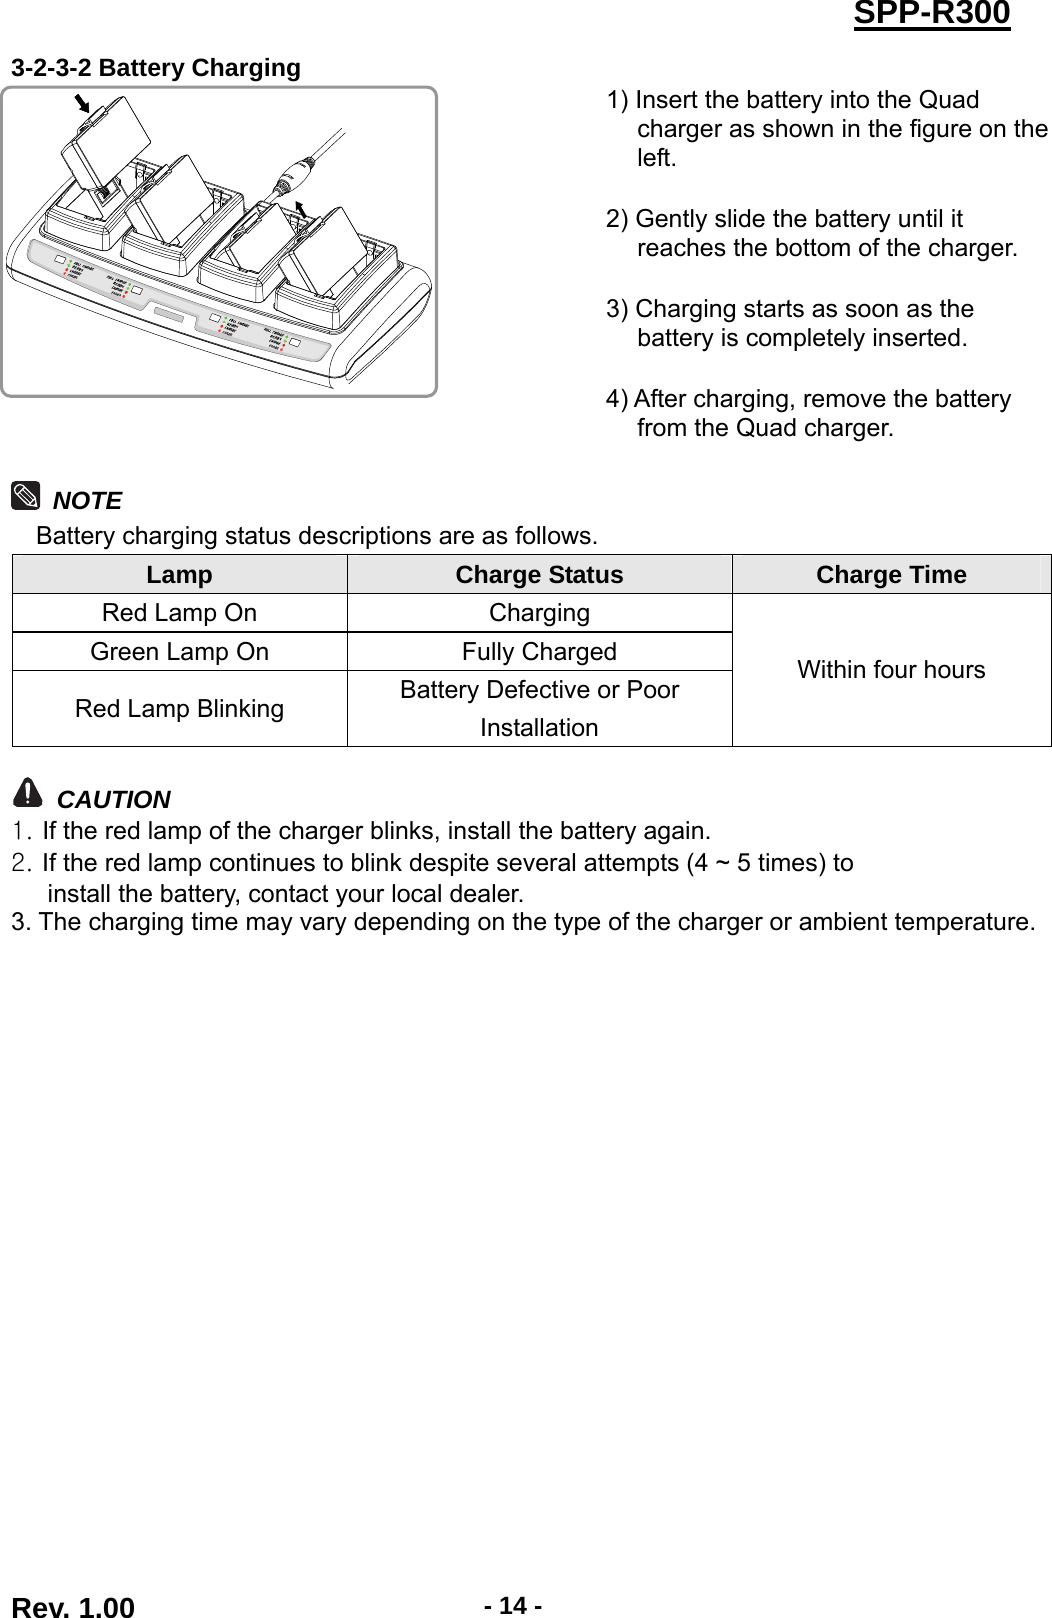  Rev. 1.00  - 14 -SPP-R3003-2-3-2 Battery Charging  1) Insert the battery into the Quad charger as shown in the figure on the left.  2) Gently slide the battery until it reaches the bottom of the charger.  3) Charging starts as soon as the battery is completely inserted.  4) After charging, remove the battery from the Quad charger.   NOTE Battery charging status descriptions are as follows. Lamp  Charge Status  Charge Time Red Lamp On Charging Green Lamp On Fully Charged Red Lamp Blinking Battery Defective or Poor Installation Within four hours   CAUTION 1. If the red lamp of the charger blinks, install the battery again. 2. If the red lamp continues to blink despite several attempts (4 ~ 5 times) to   install the battery, contact your local dealer. 3. The charging time may vary depending on the type of the charger or ambient temperature.  